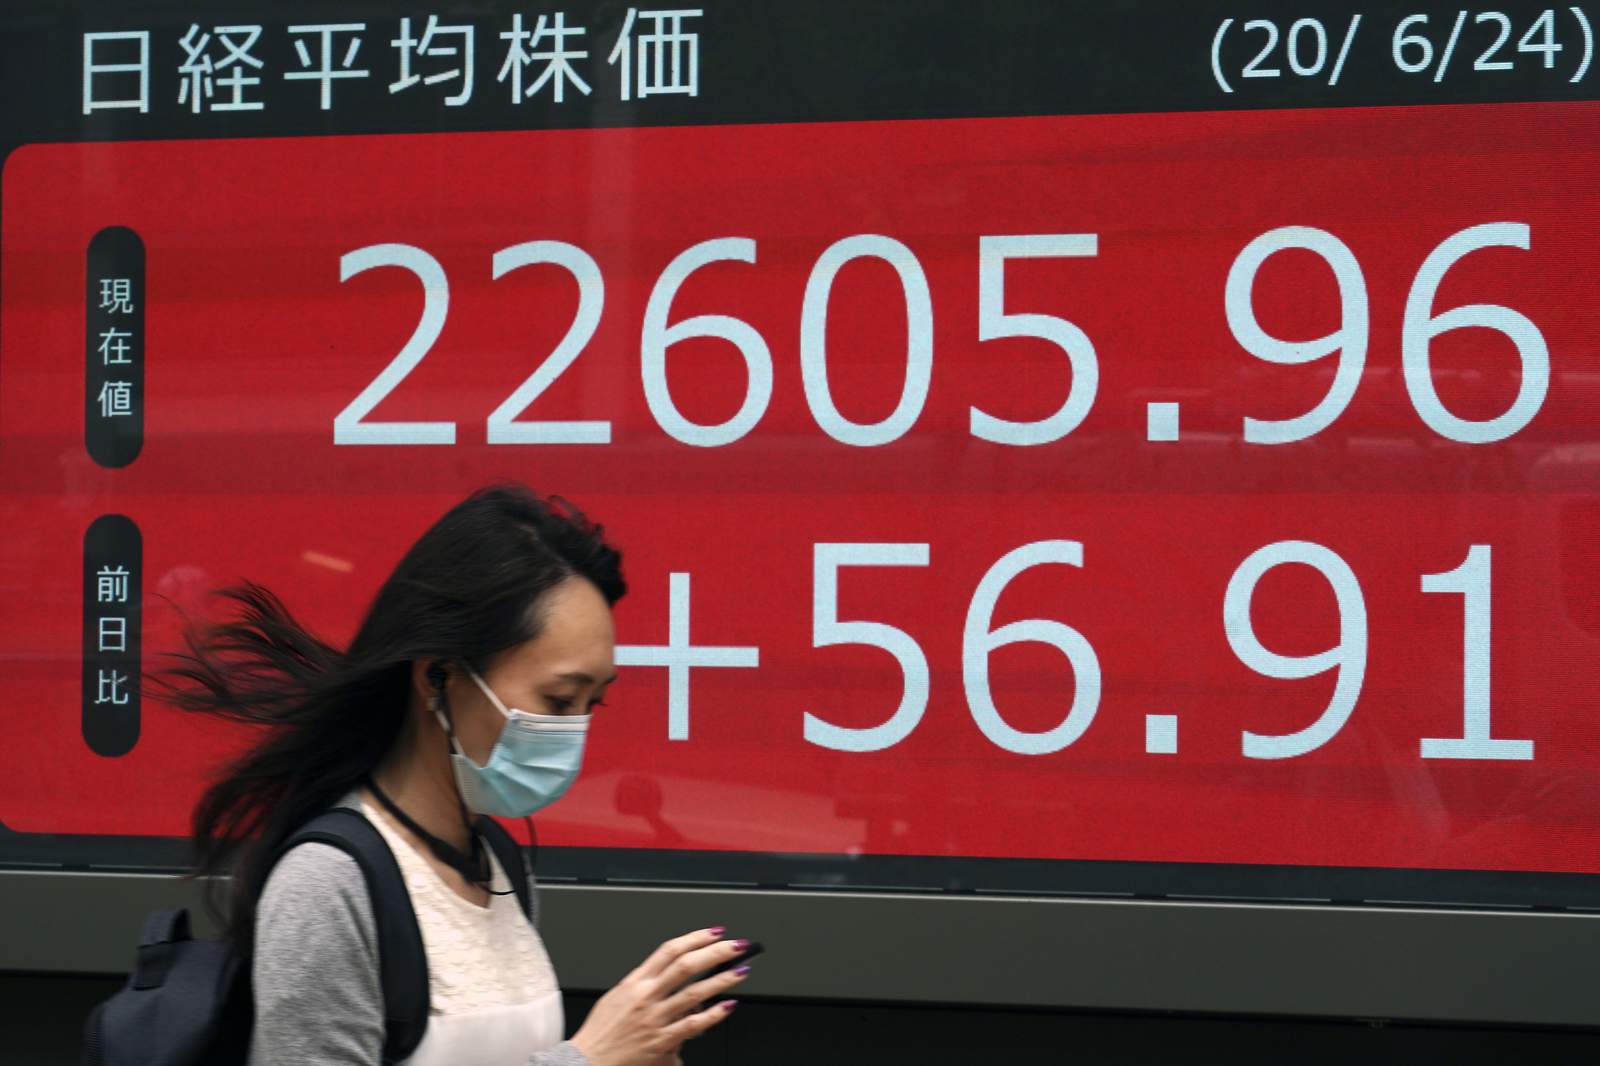 Asia shares higher after US rally despite rising virus fears